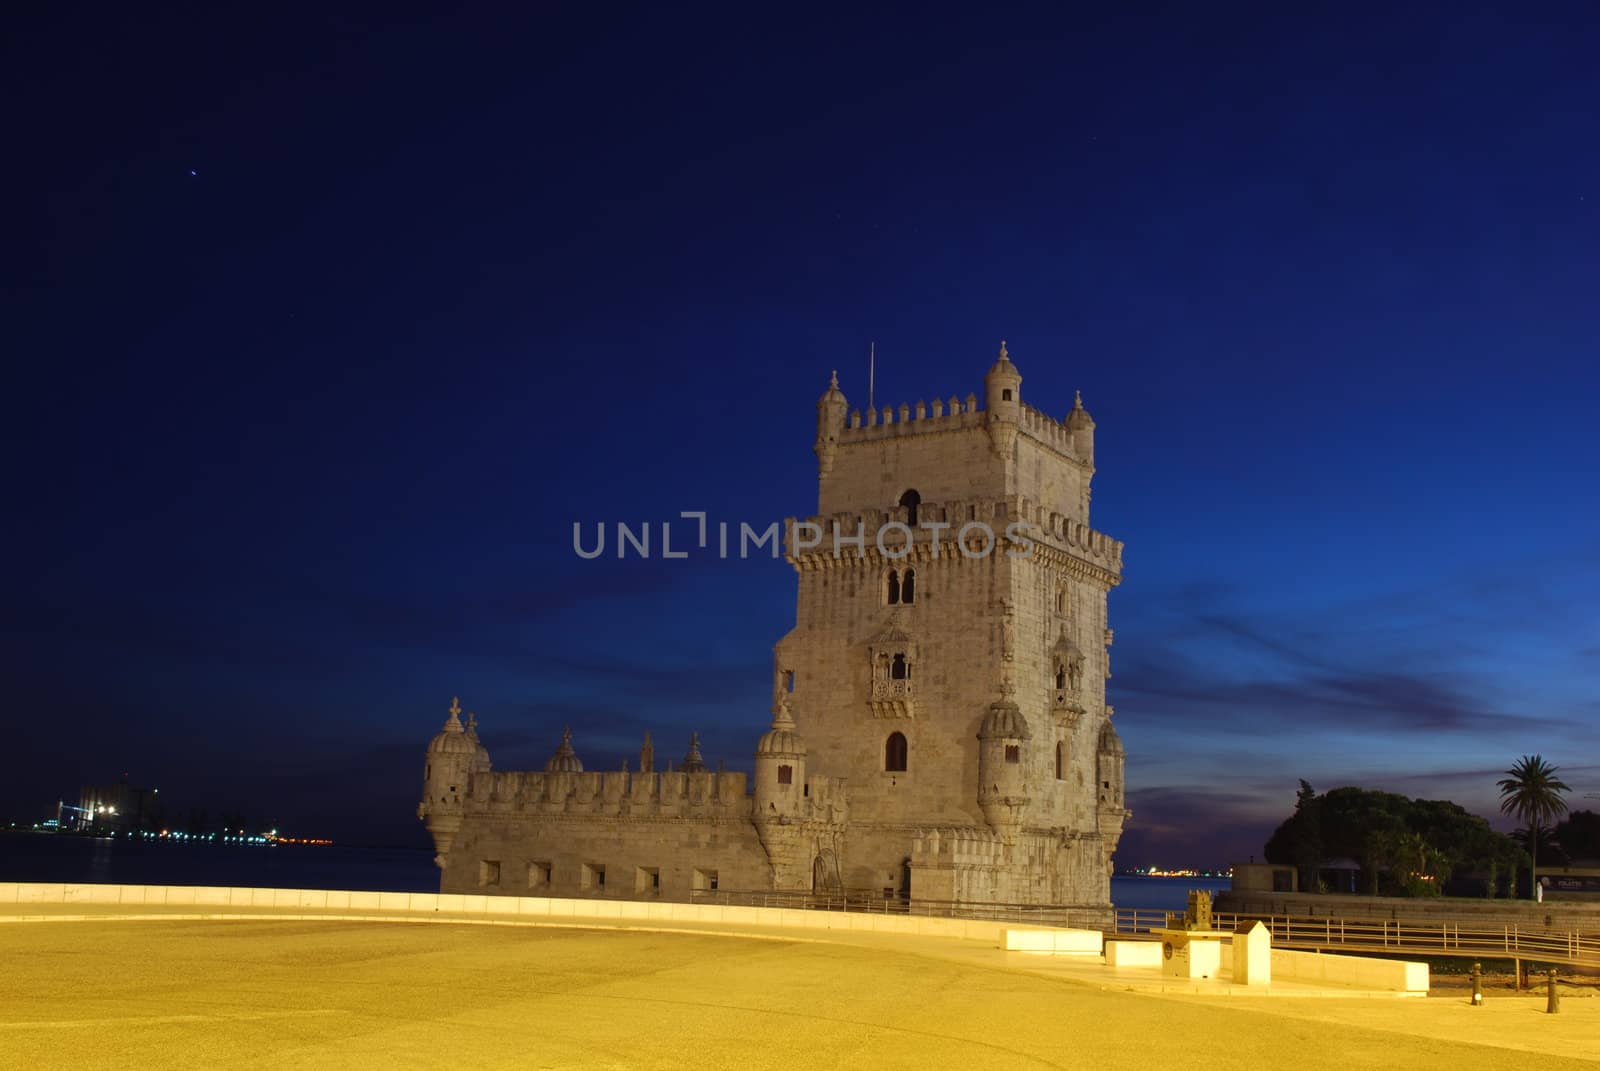 Belem Tower in Lisbon, Portugal (Sunset) by luissantos84